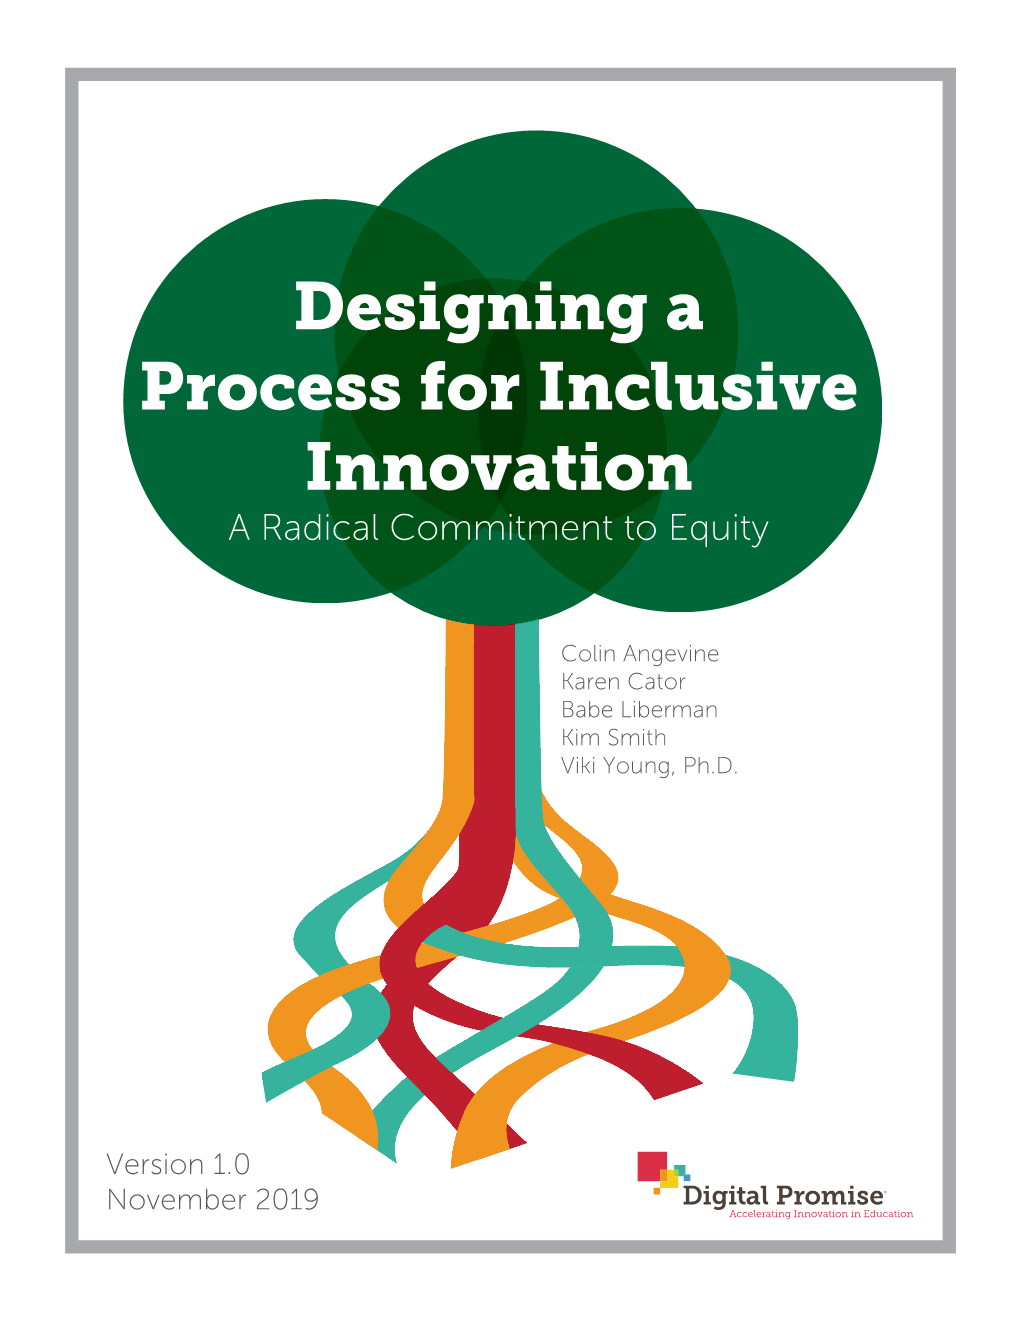 Designing a Process for Inclusive Innovation a Radical Commitment to Equity